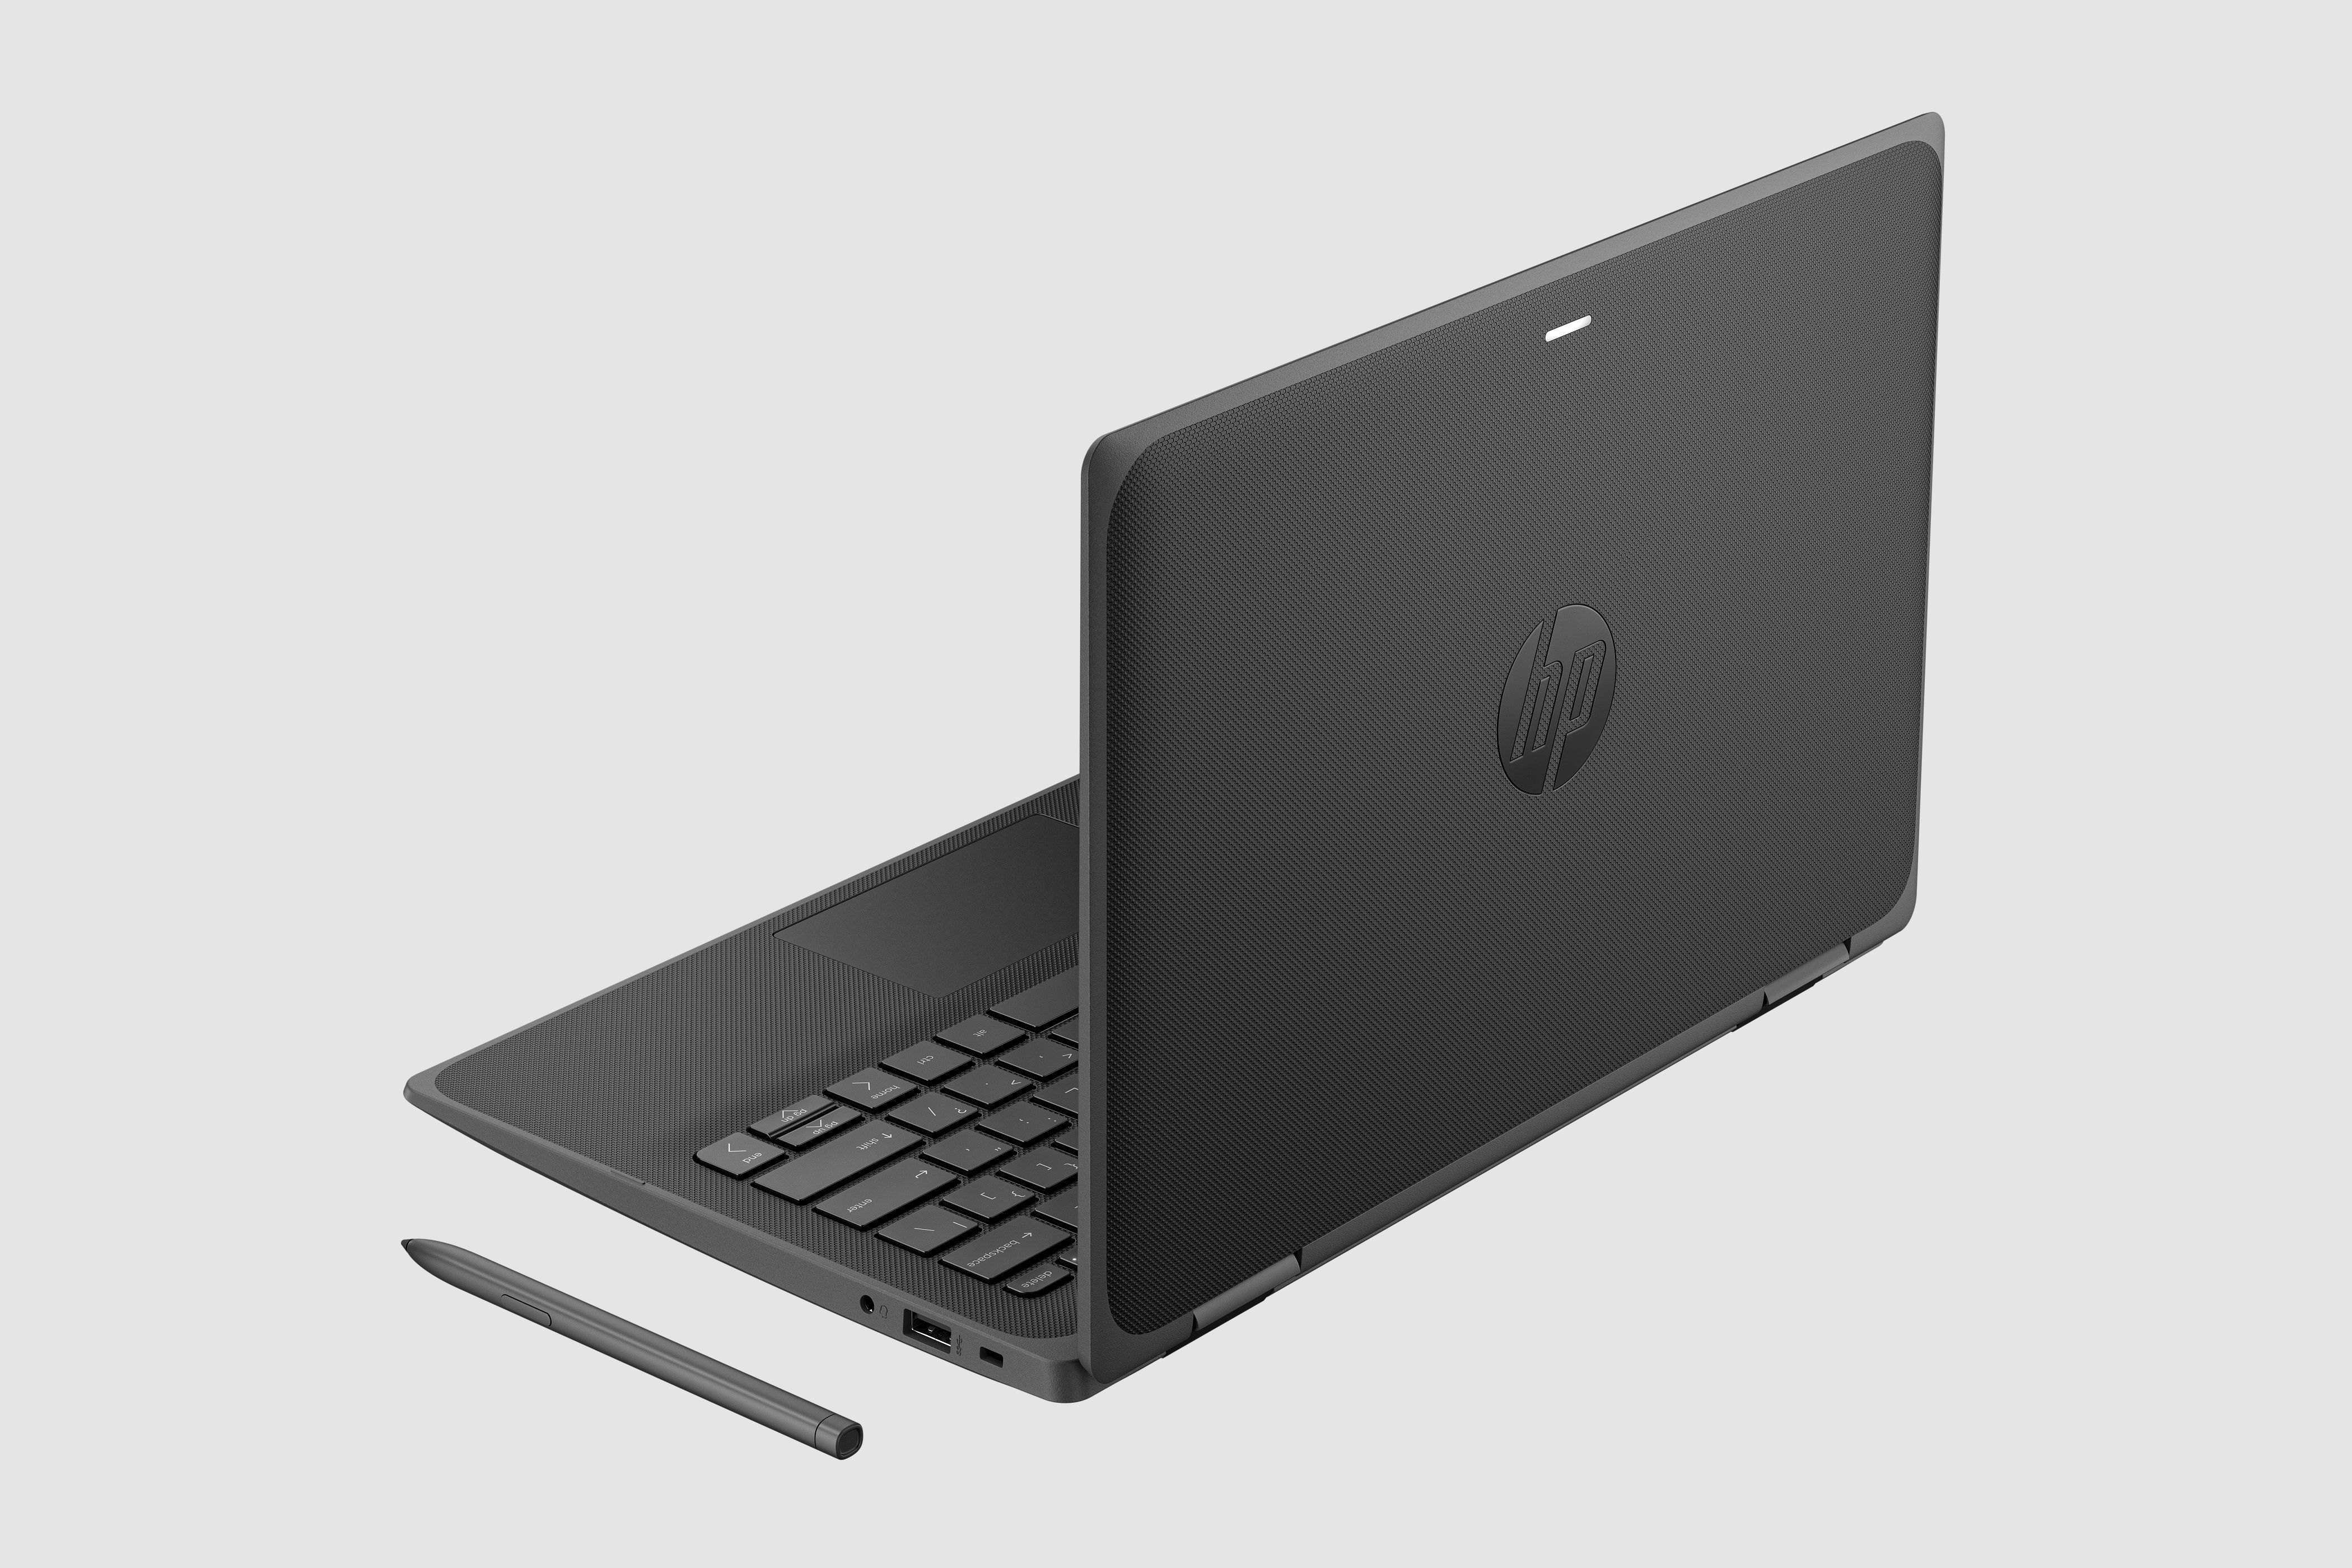 HP launches new rugged Fortis laptops for business and education